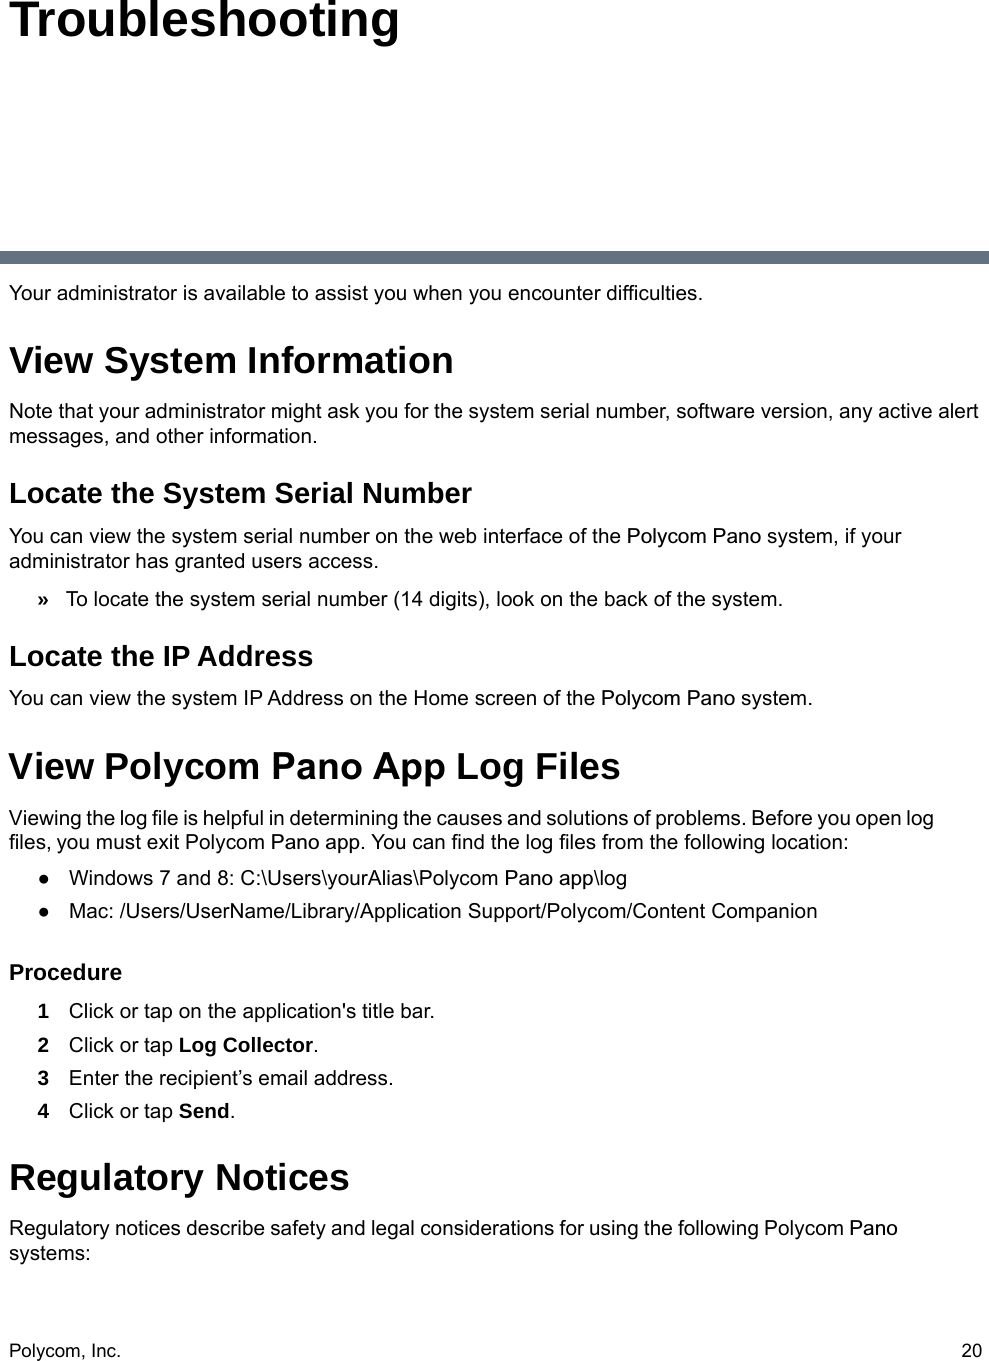 Polycom, Inc.  20TroubleshootingYour administrator is available to assist you when you encounter difficulties.View System InformationNote that your administrator might ask you for the system serial number, software version, any active alert messages, and other information.Locate the System Serial NumberYou can view the system serial number on the web interface of the Polycom Pano system, if your administrator has granted users access.»To locate the system serial number (14 digits), look on the back of the system.Locate the IP Address You can view the system IP Address on the Home screen of the Polycom Pano system.View Polycom Pano App Log FilesViewing the log file is helpful in determining the causes and solutions of problems. Before you open log files, you must exit Polycom Pano app. You can find the log files from the following location:●Windows 7 and 8: C:\Users\yourAlias\Polycom Pano app\log●Mac: /Users/UserName/Library/Application Support/Polycom/Content Companion Procedure1Click or tap on the application&apos;s title bar.2Click or tap Log Collector.3Enter the recipient’s email address.4Click or tap Send.Regulatory NoticesRegulatory notices describe safety and legal considerations for using the following Polycom Pano systems: